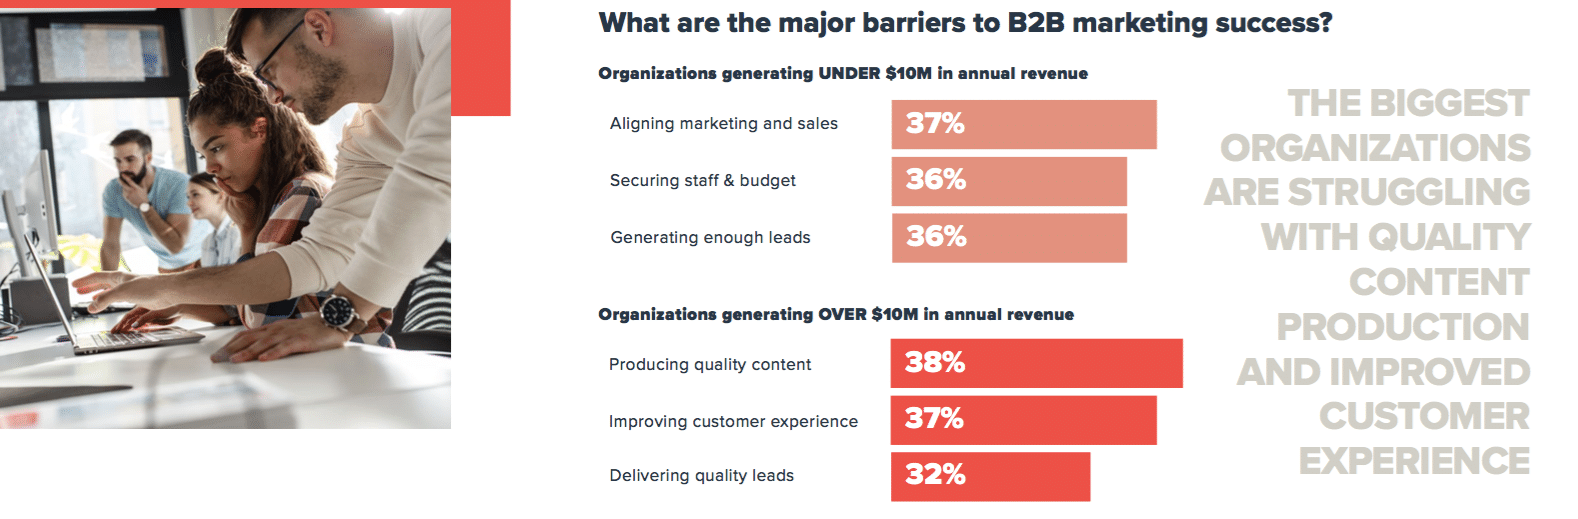 B2B marketing in focus: Rising budgets & CX challenges